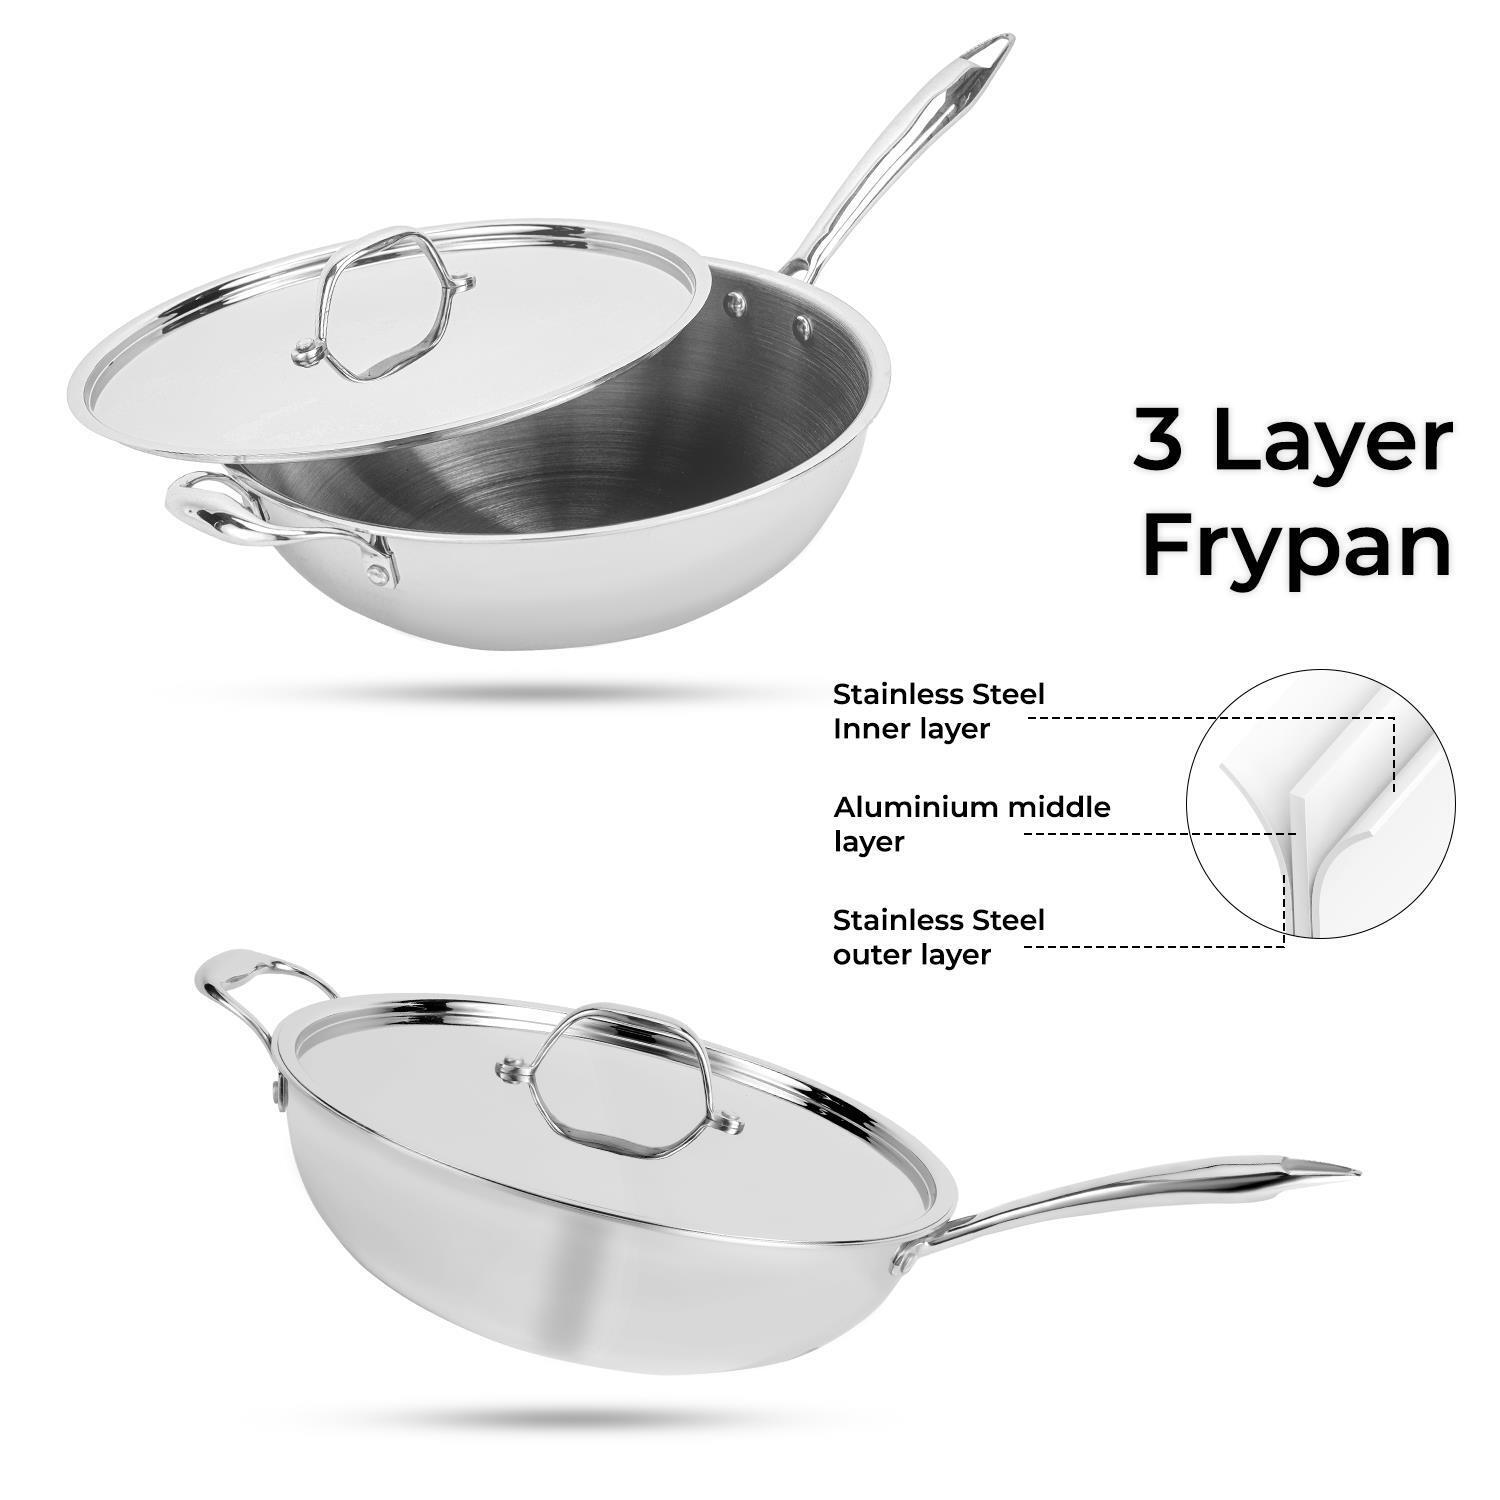 24cm Triply Stainless Steel Wok Pan With Lid